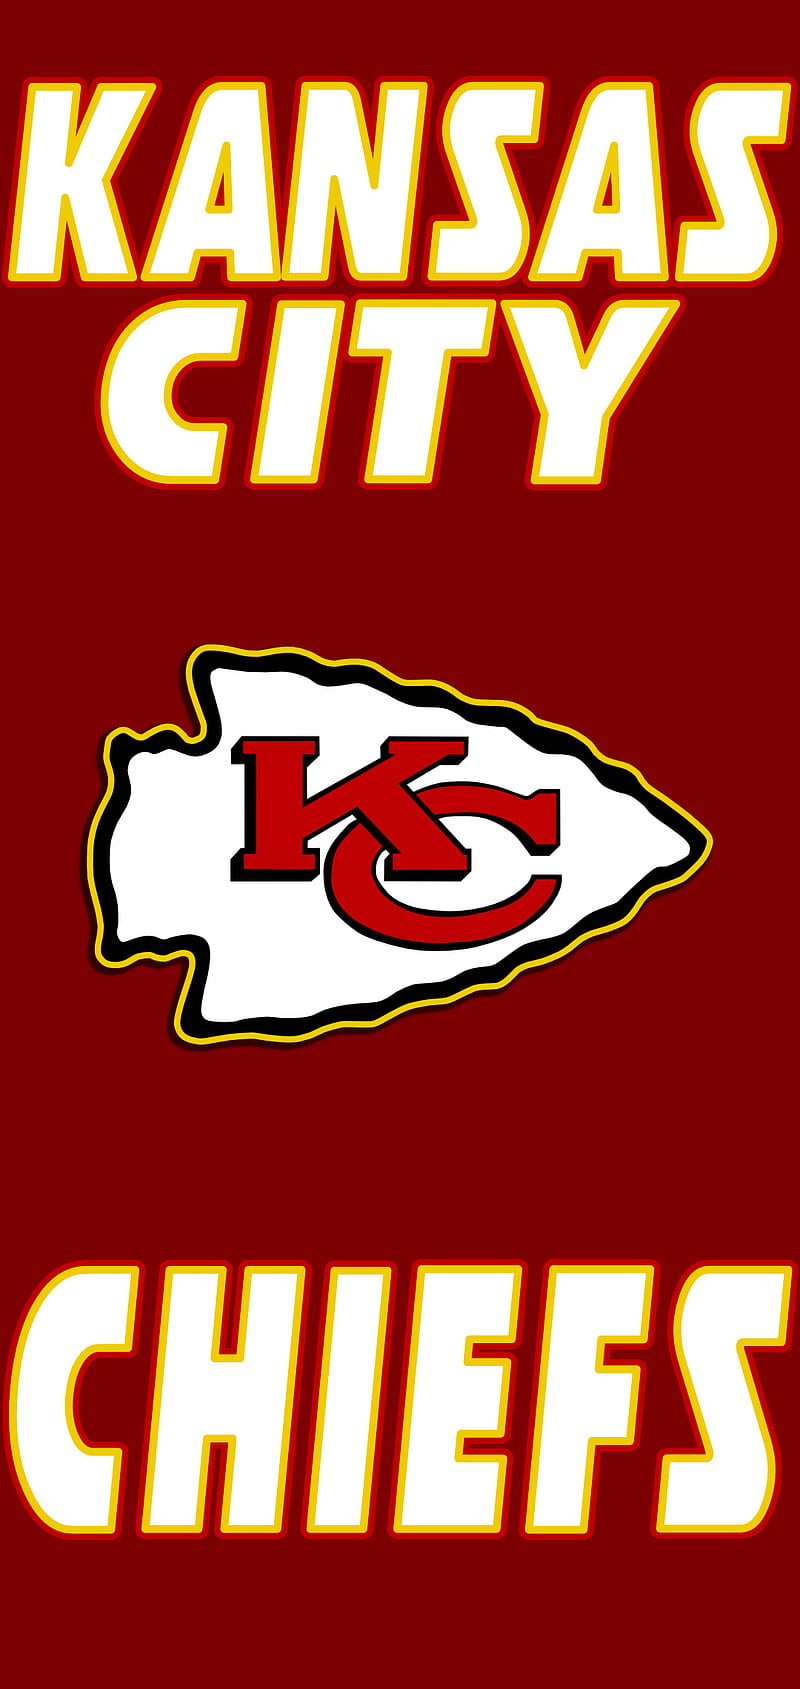 Kansas City Chiefs iPhone Wallpapers  iPHONE X11Android   Flickr